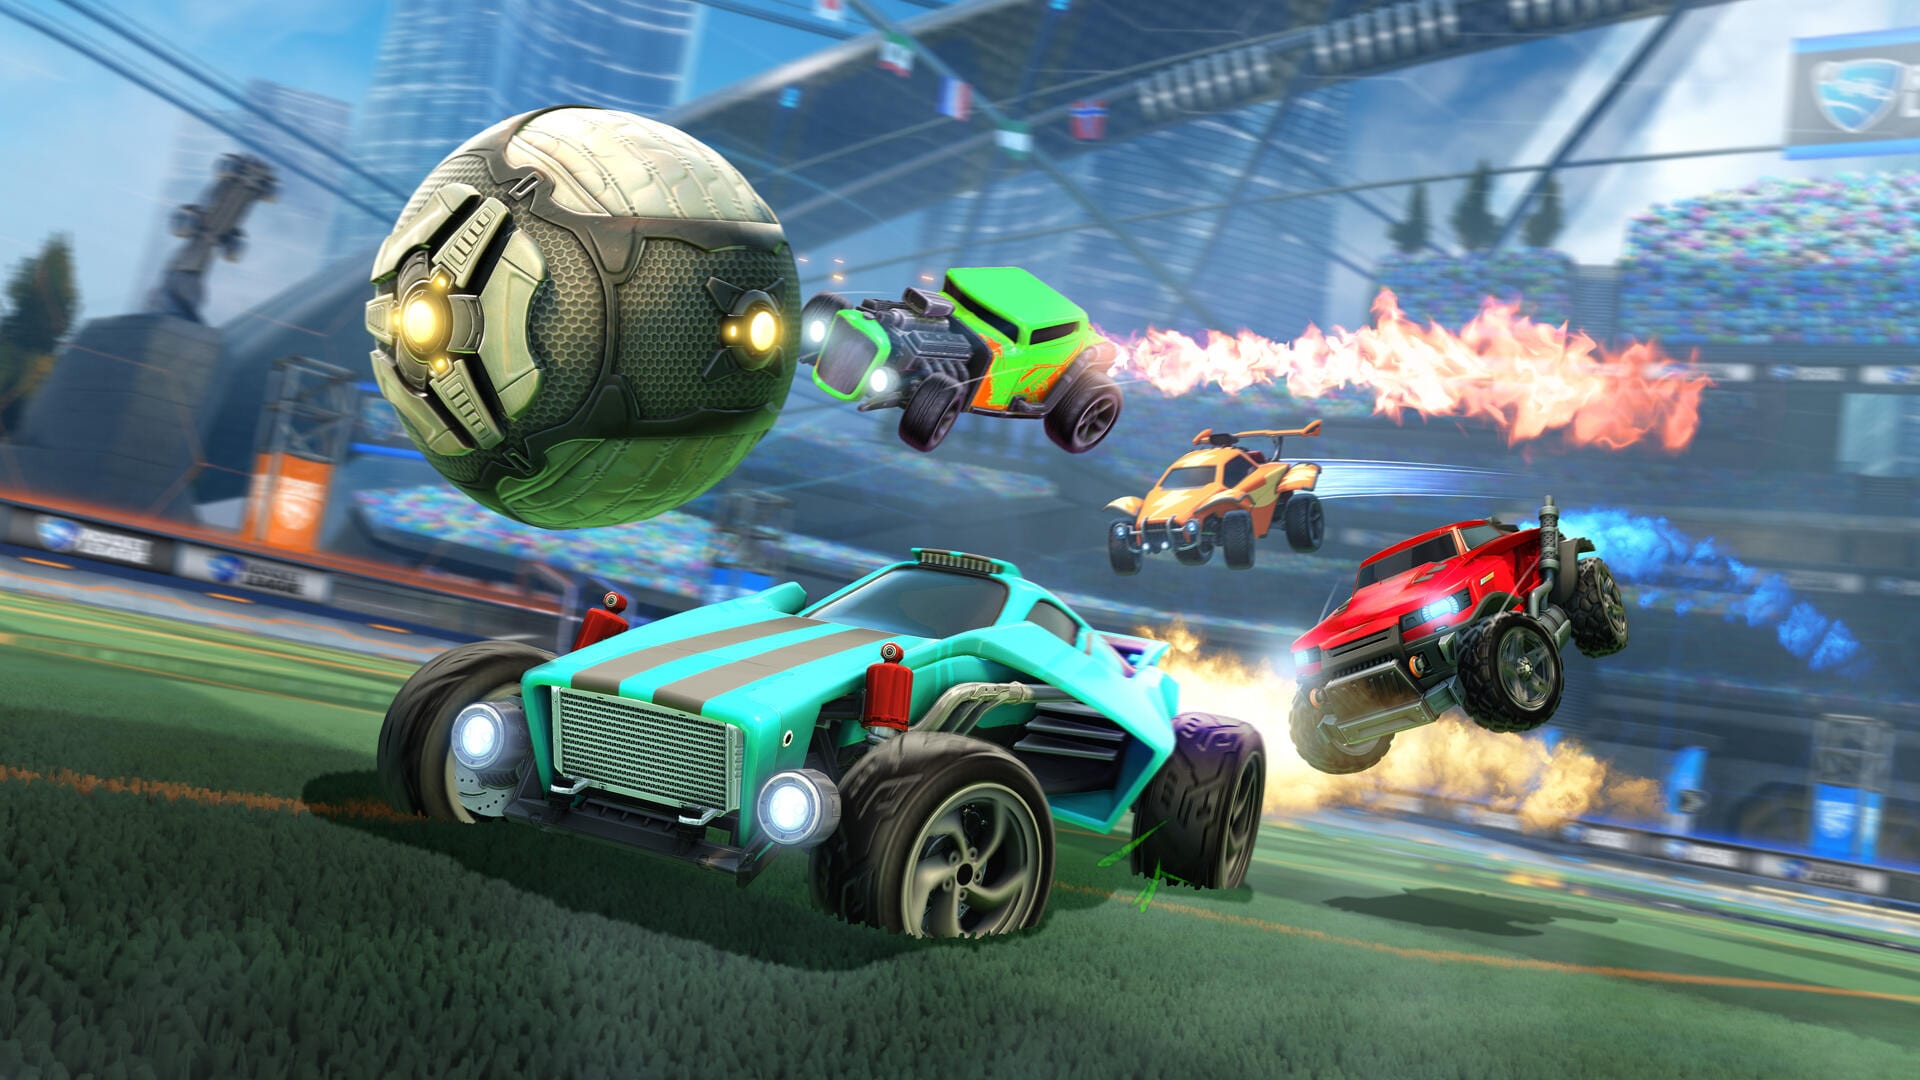 Rocket League will be available free to play this summer